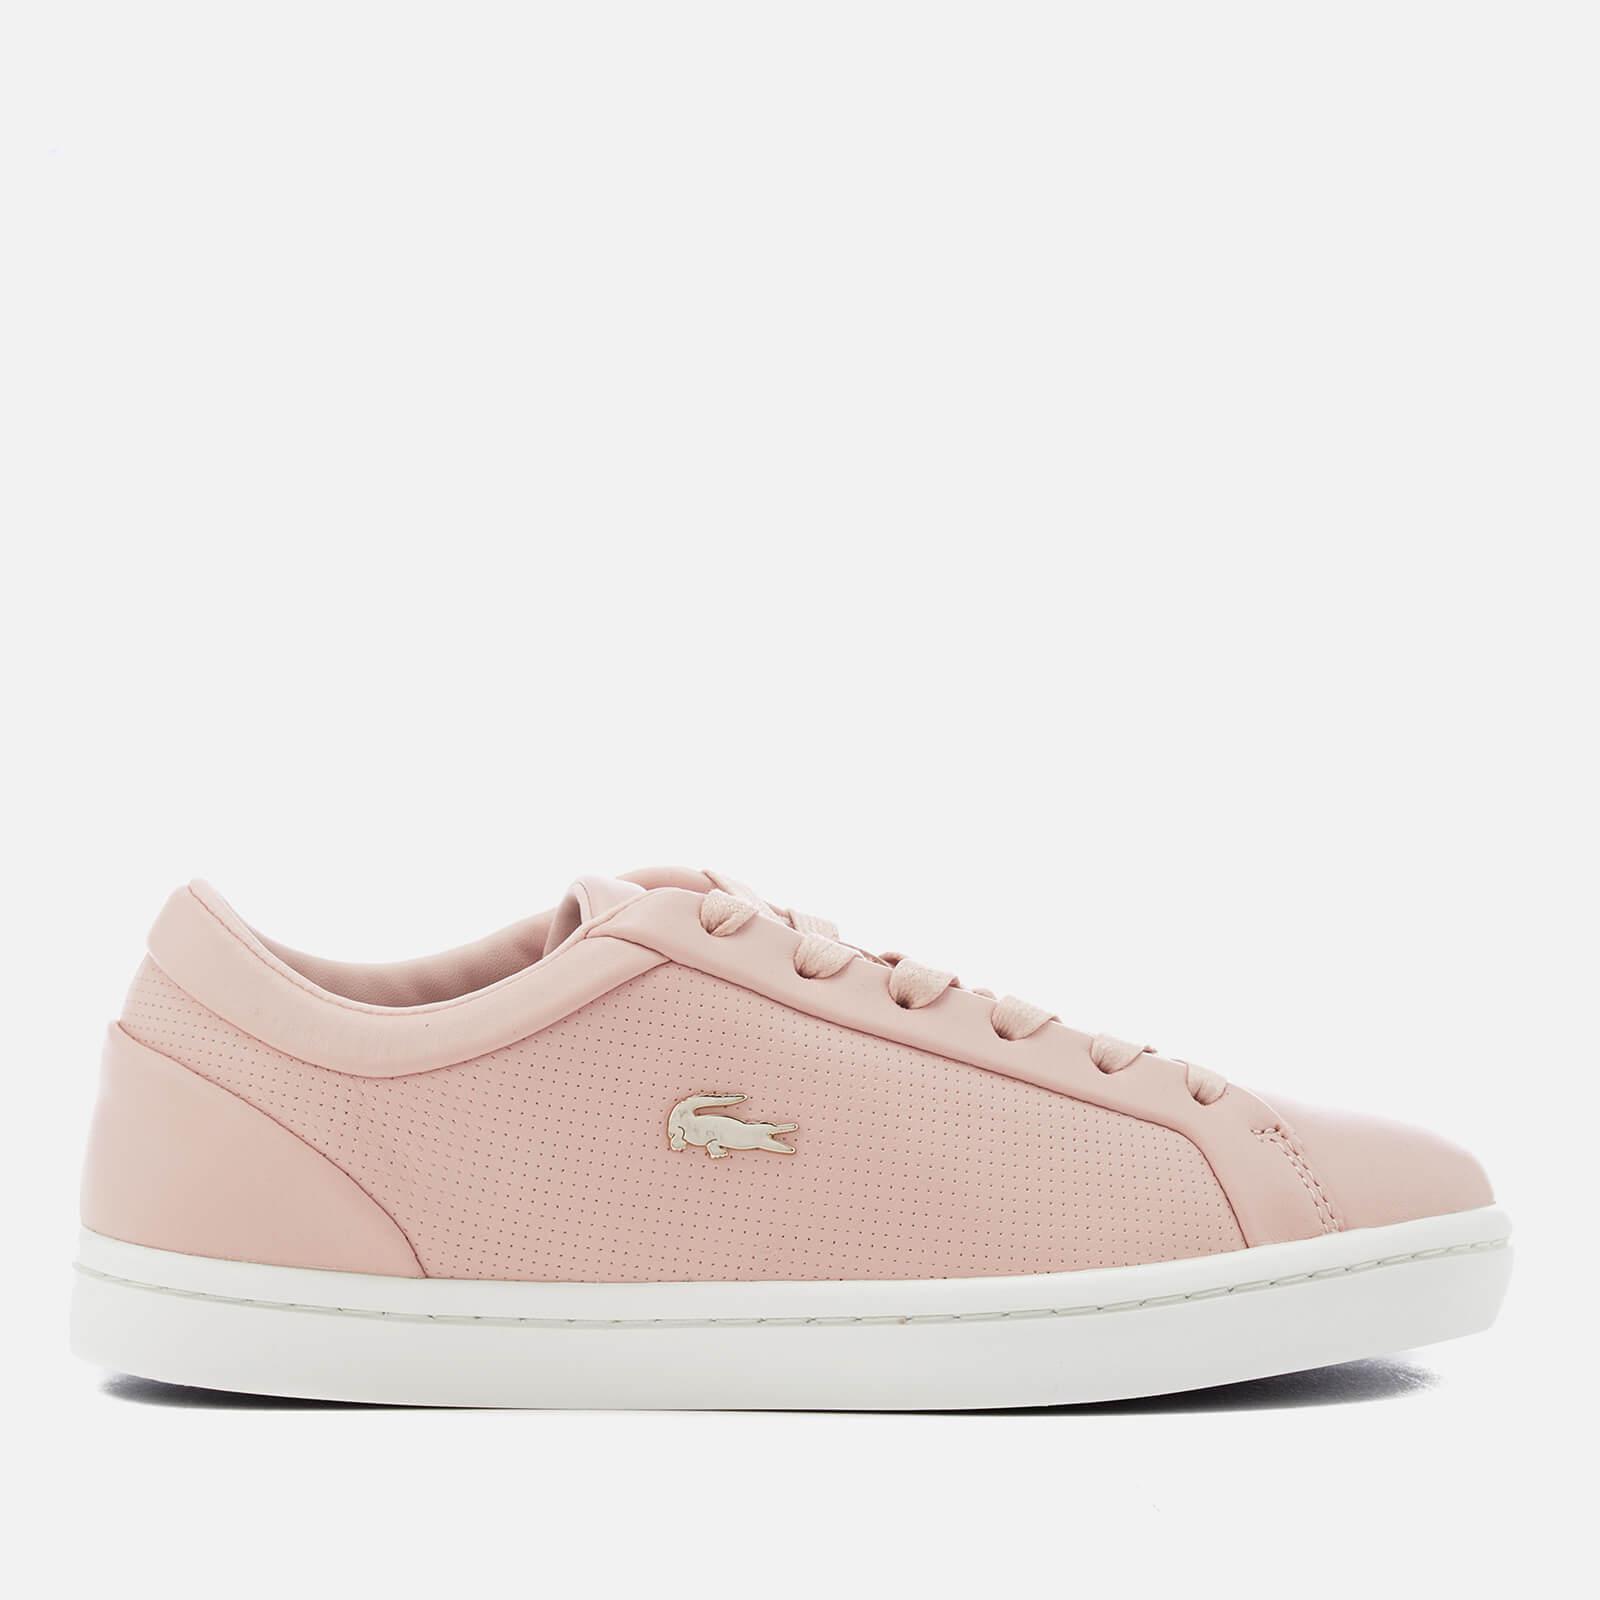 Lacoste Straightset 118 2 Leather Cupsole Trainers in Pink for Men - Lyst